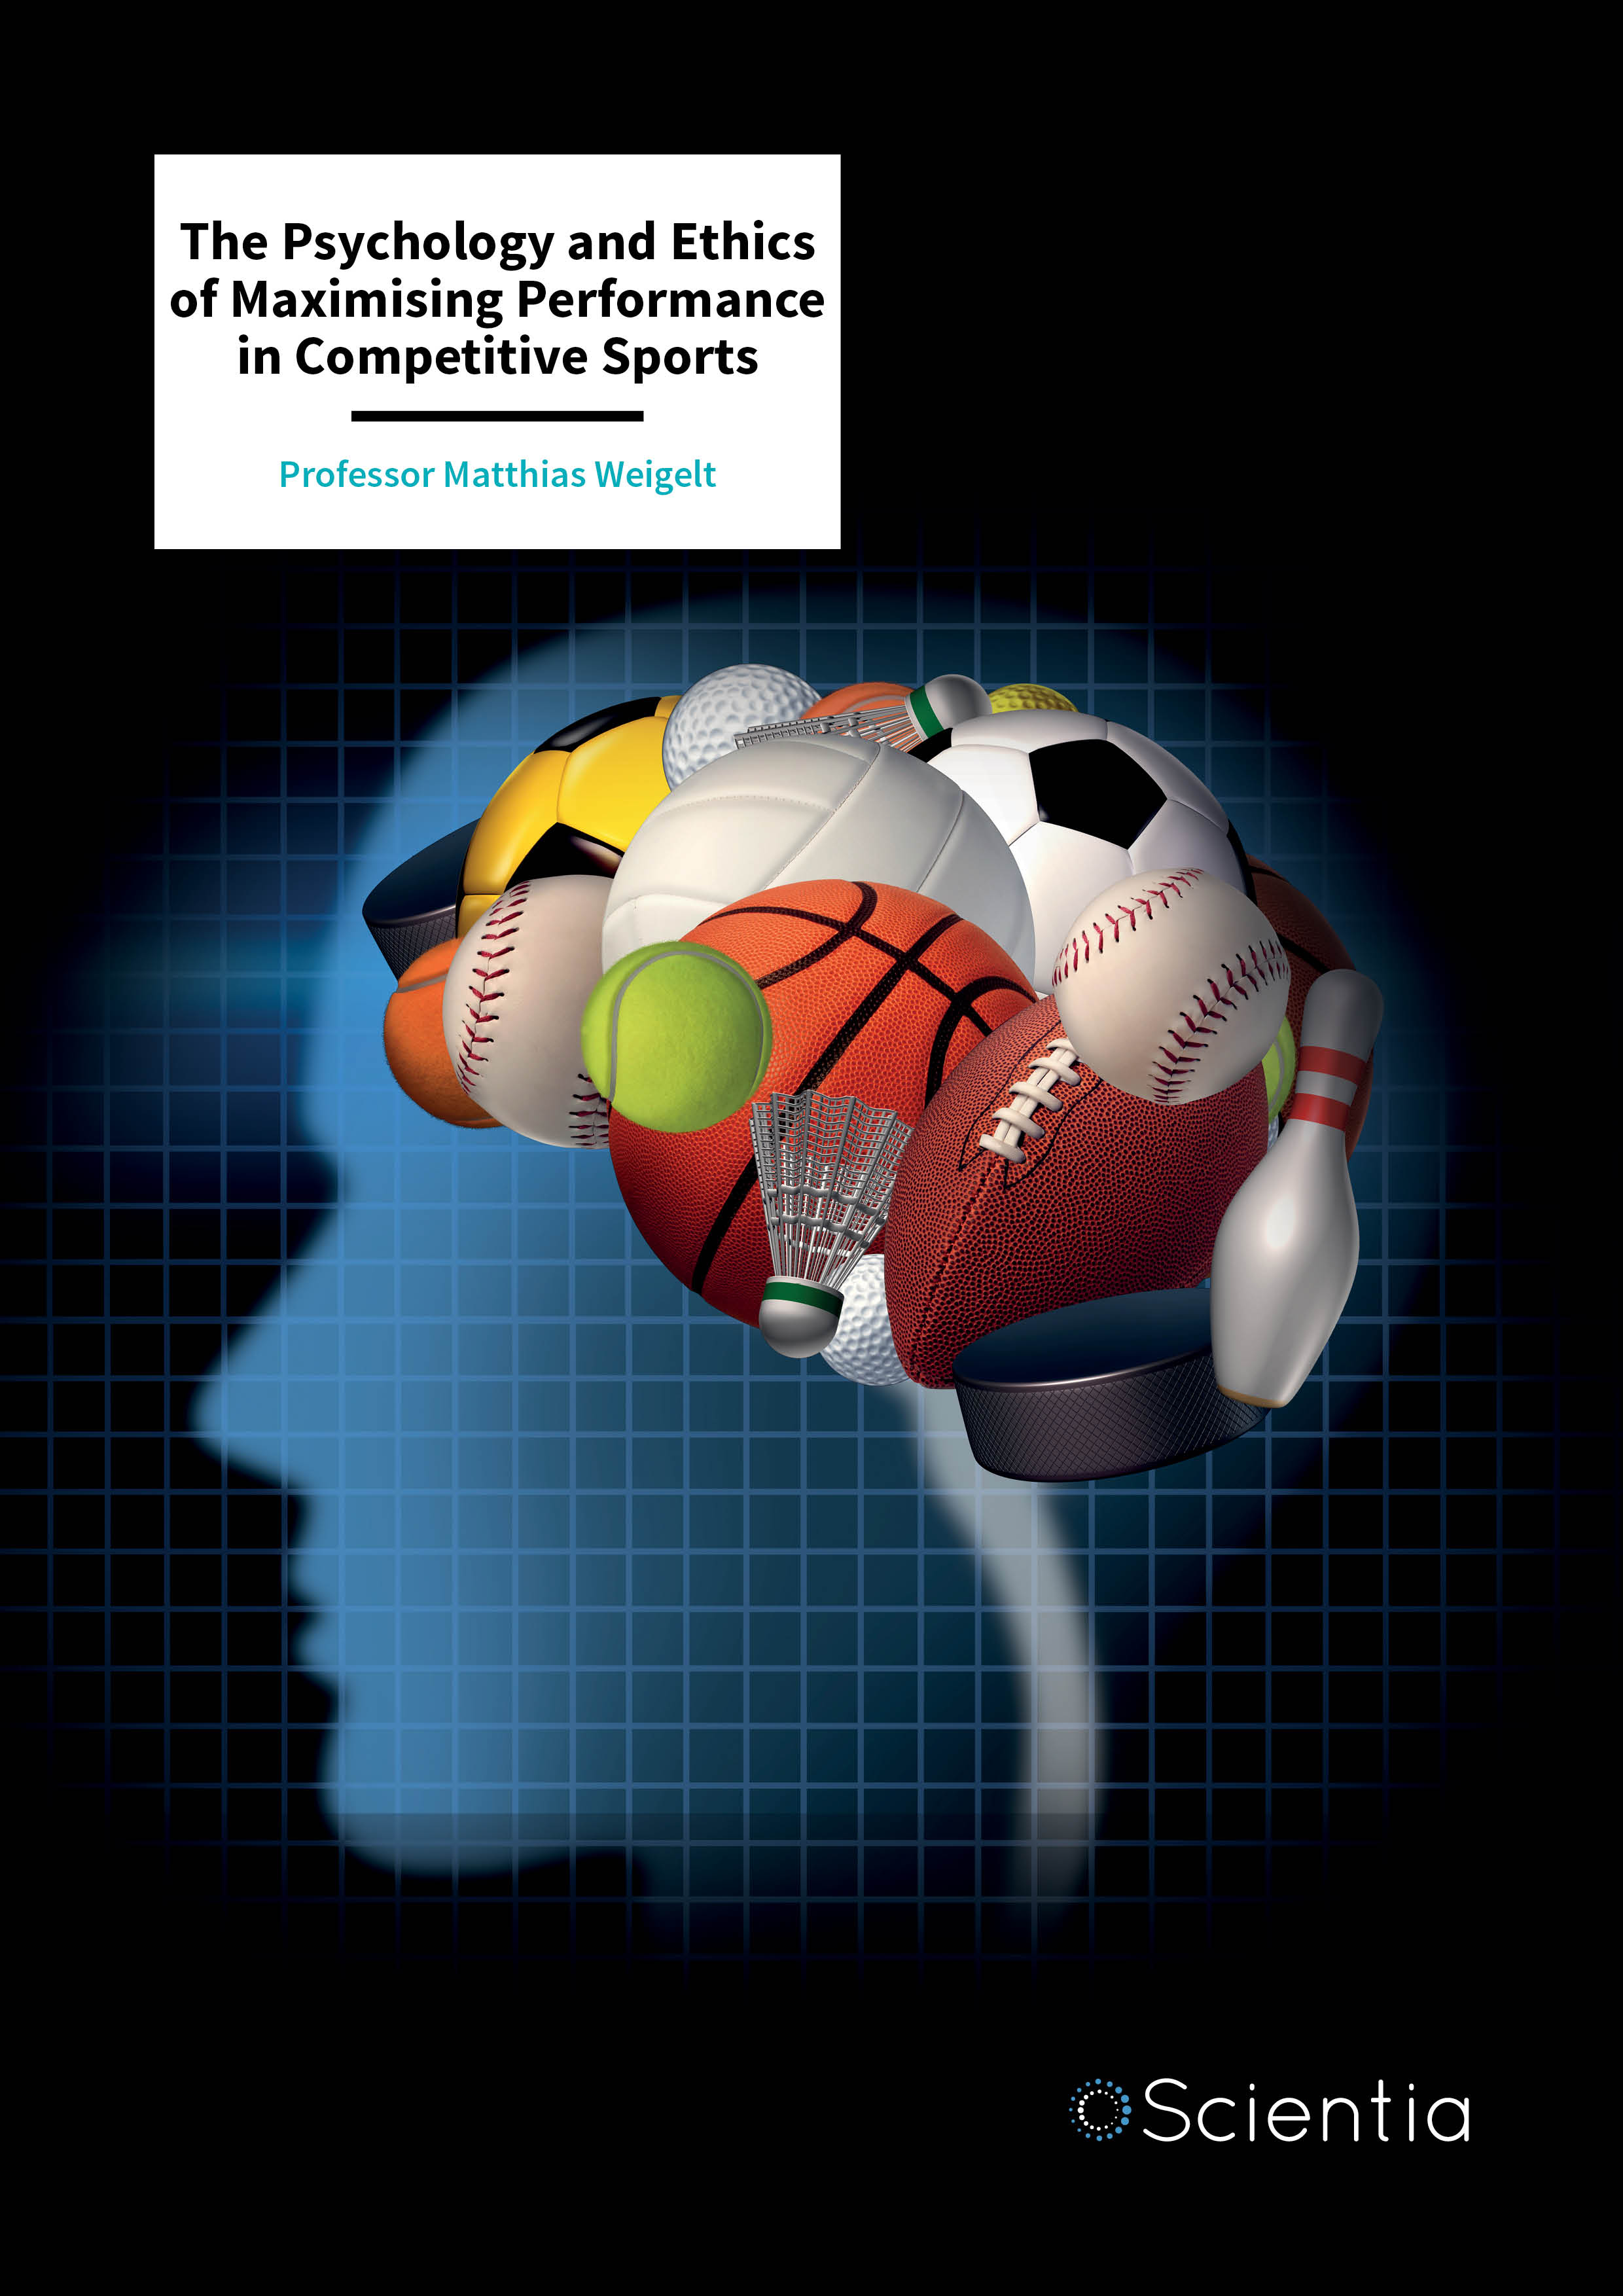 Professor Matthias Weigelt – The Psychology and Ethics of Maximising Performance in Competitive Sports